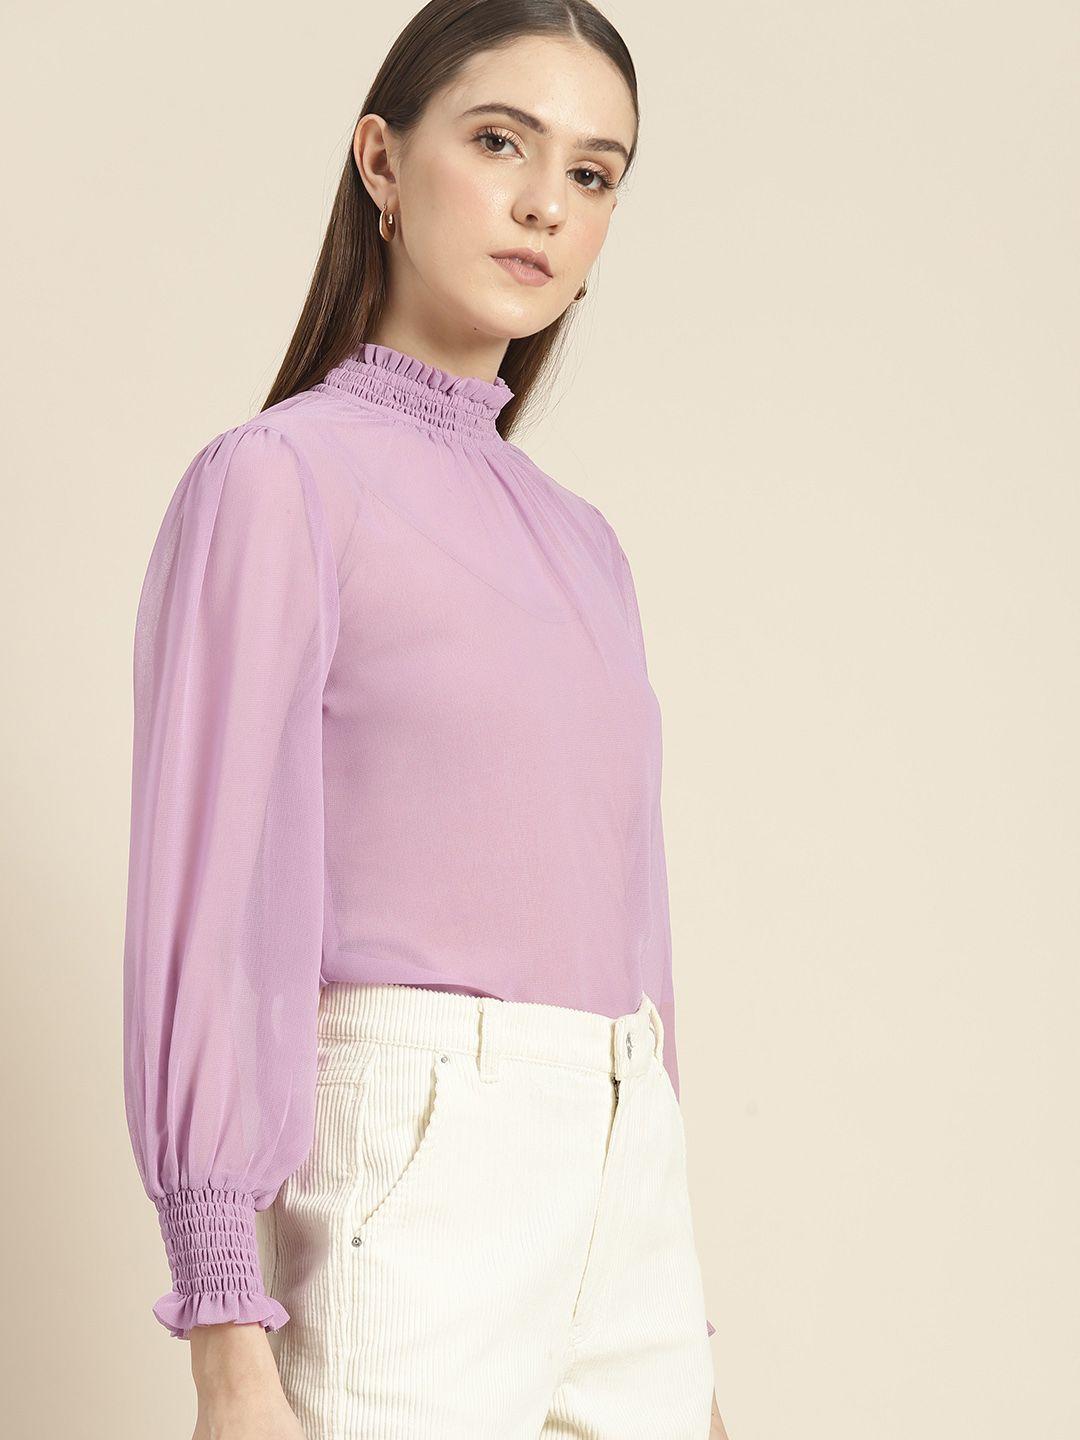 her by invictus high-neck puff sleeves sheer top